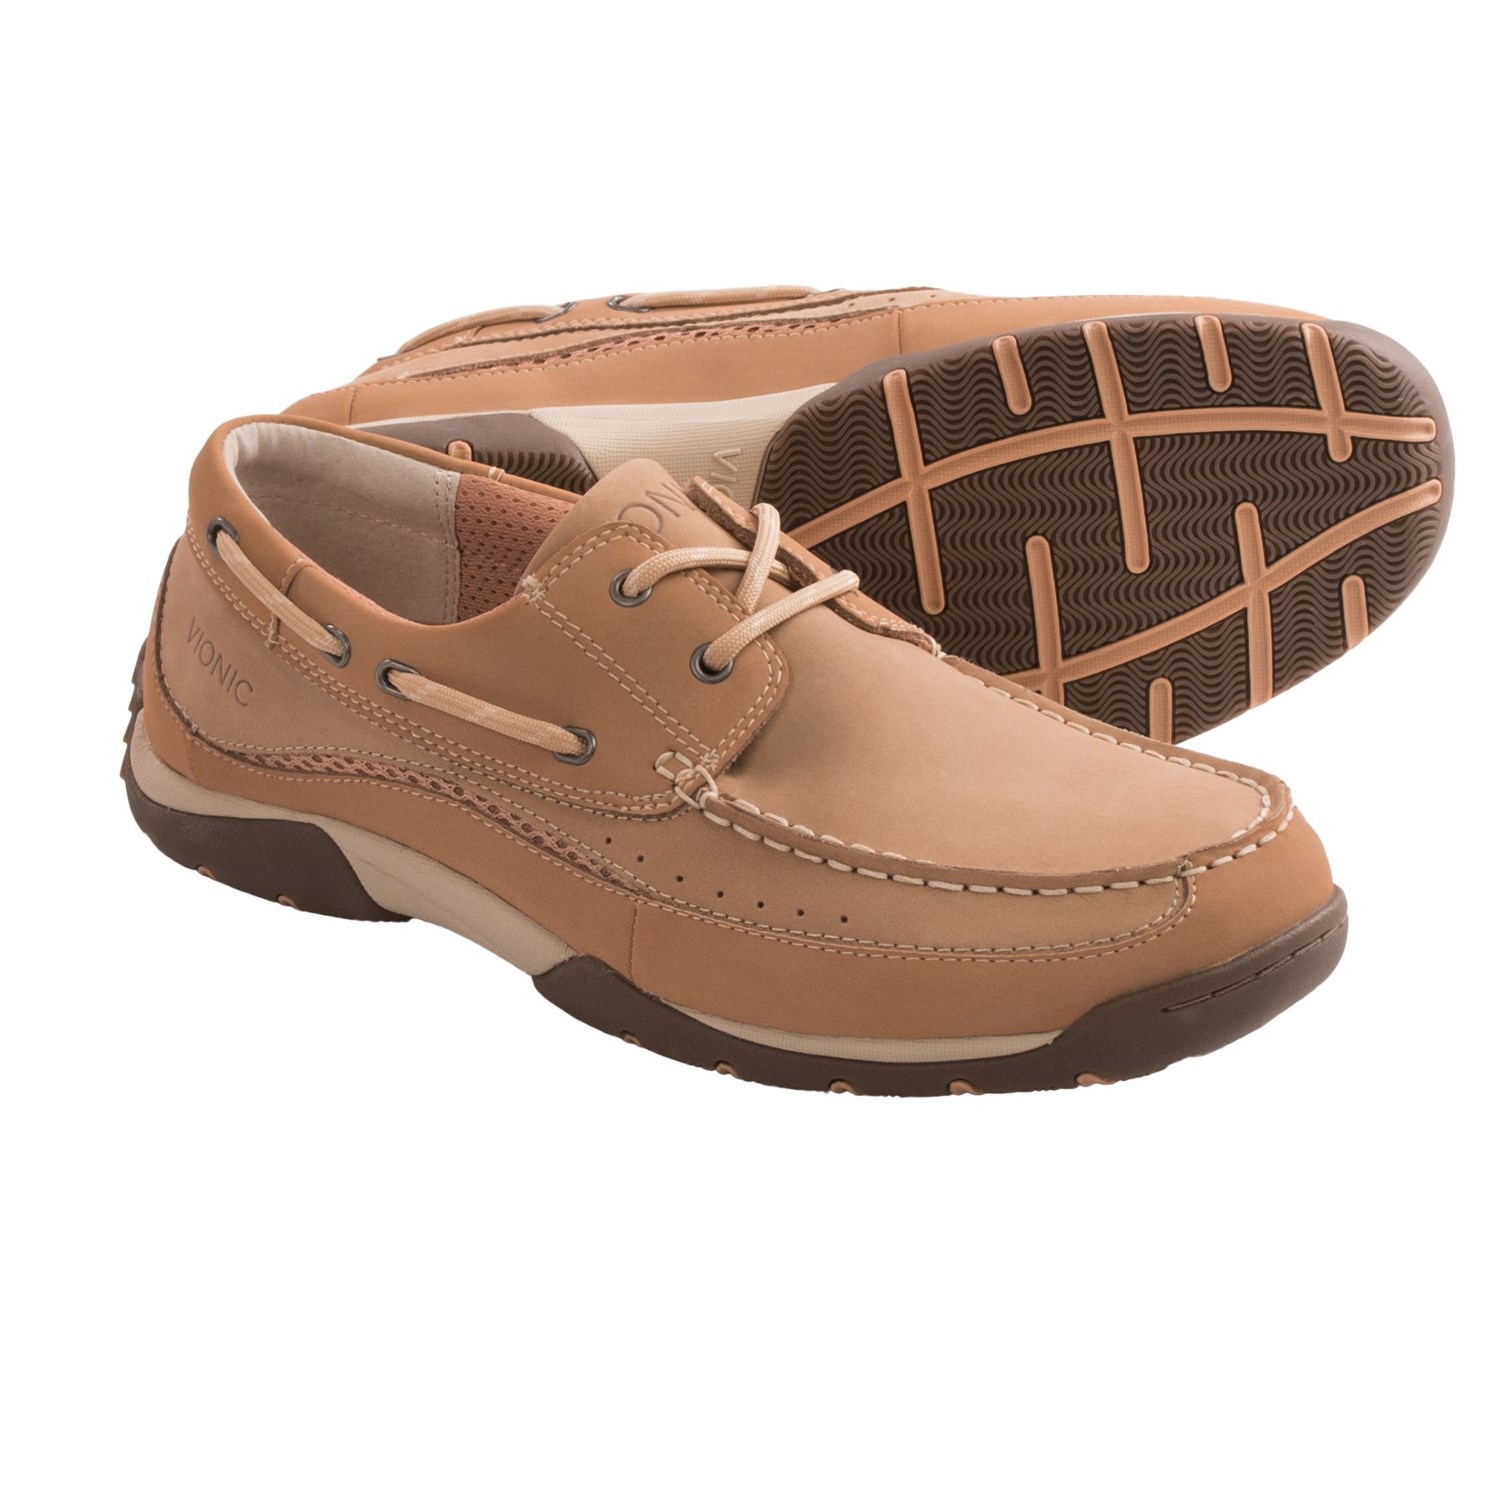 Vionic with Orthaheel Technology Eddy Boat Shoes (For Men) in Sand